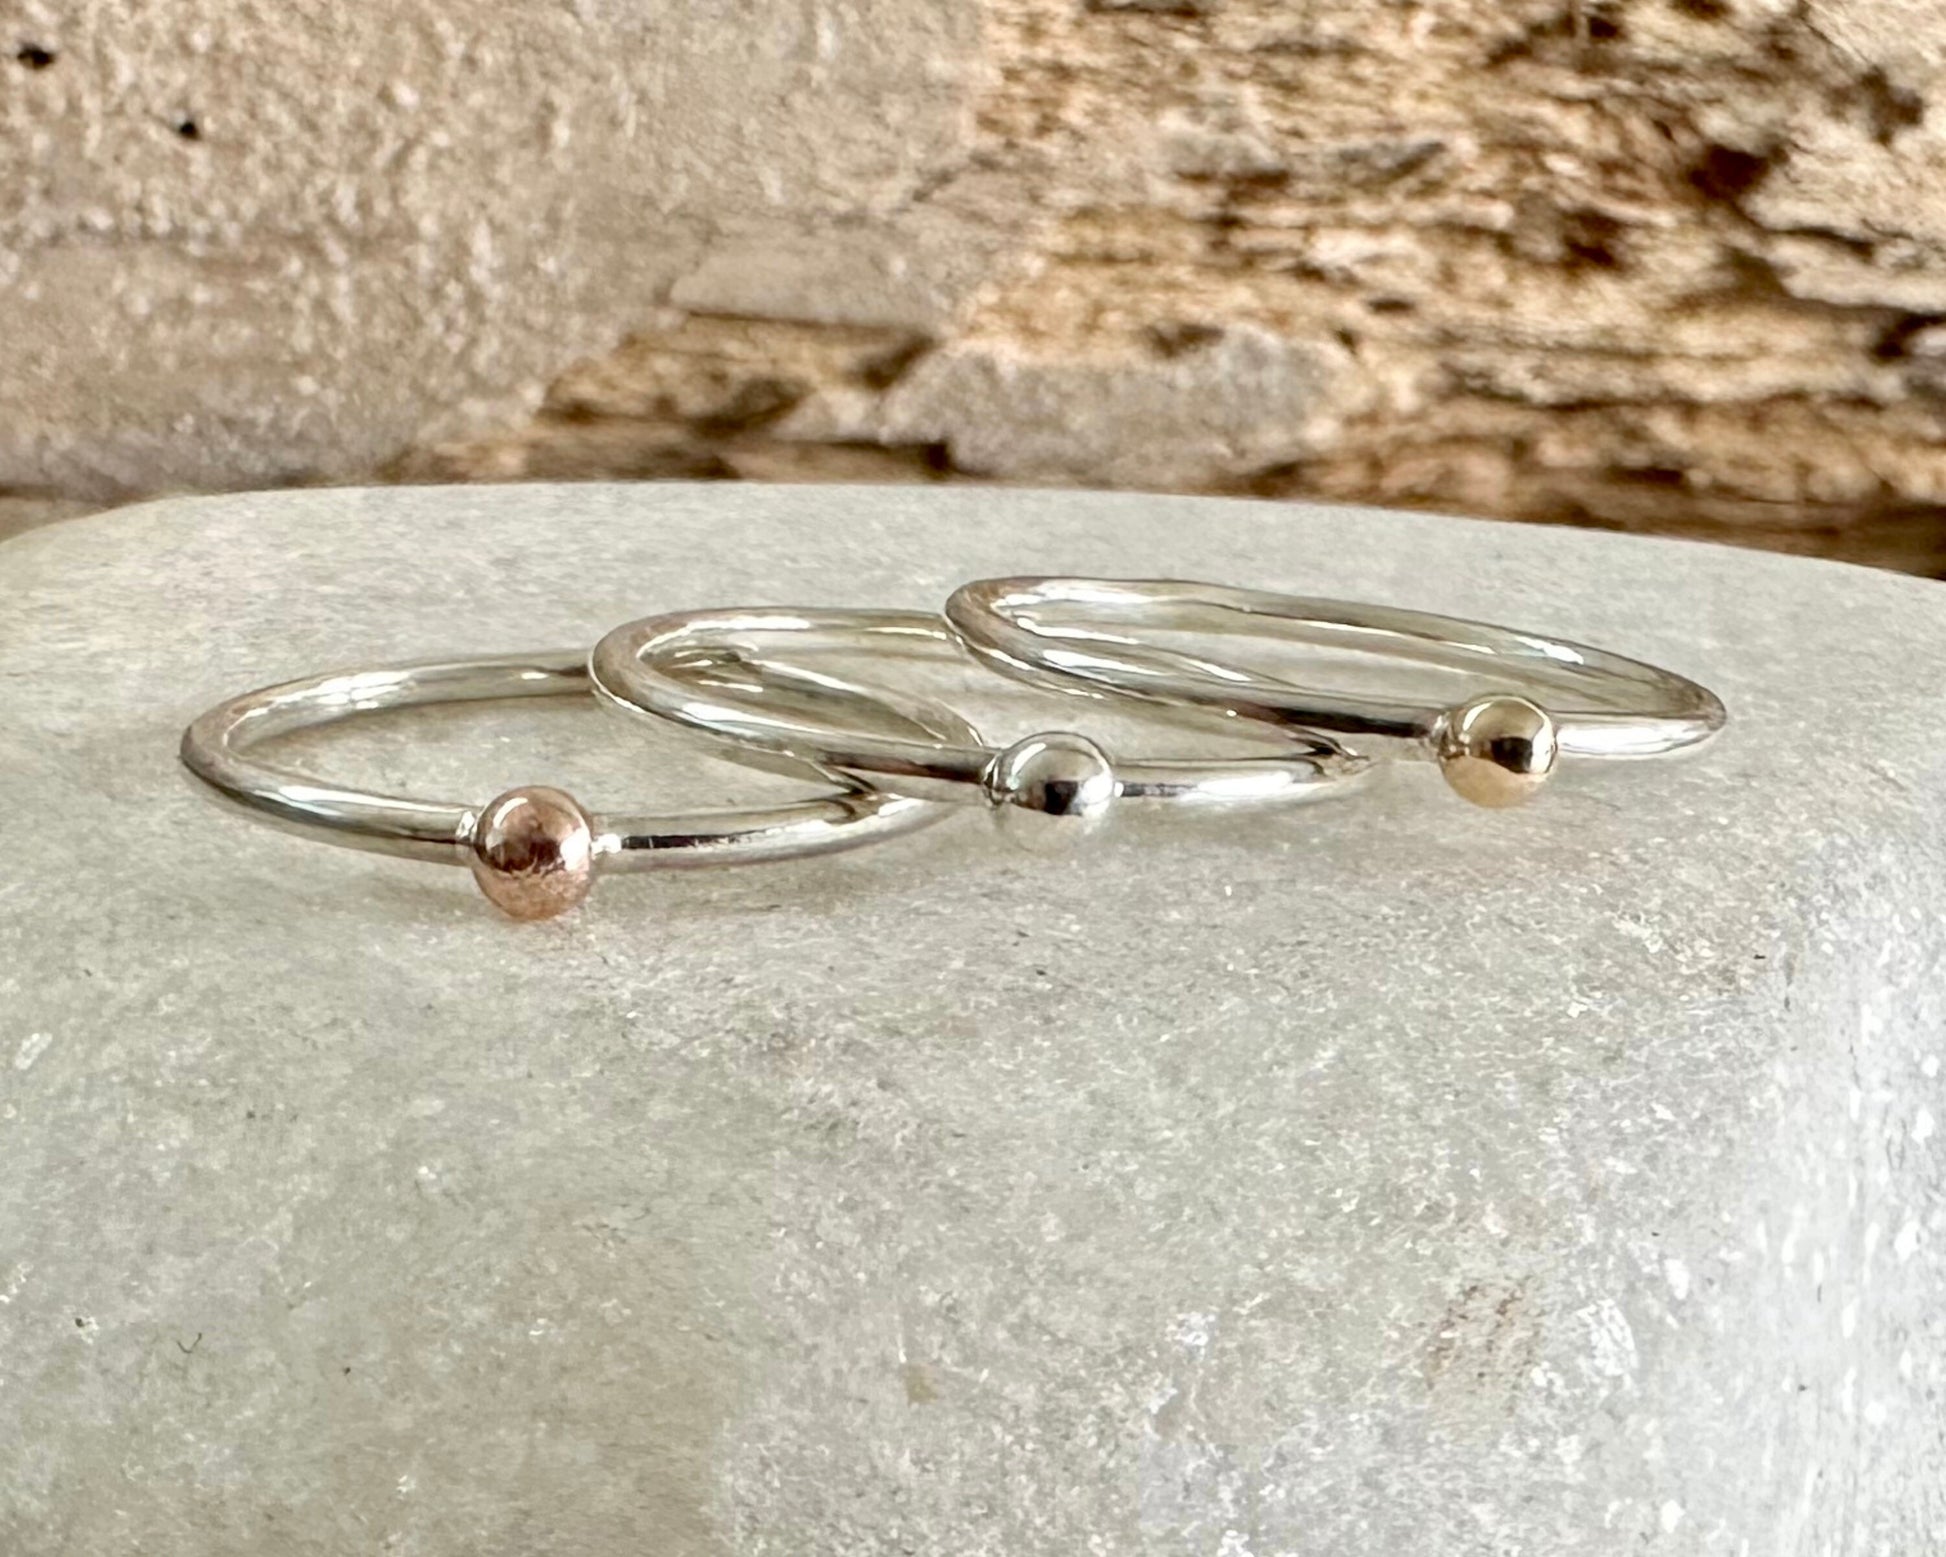 Solid Yellow Gold, Rose Gold or Silver Dot on 1.3mm 925 Sterling Silver Ring Band, Pebble Ring, Mixed Metal Recycled Stacking Ring.